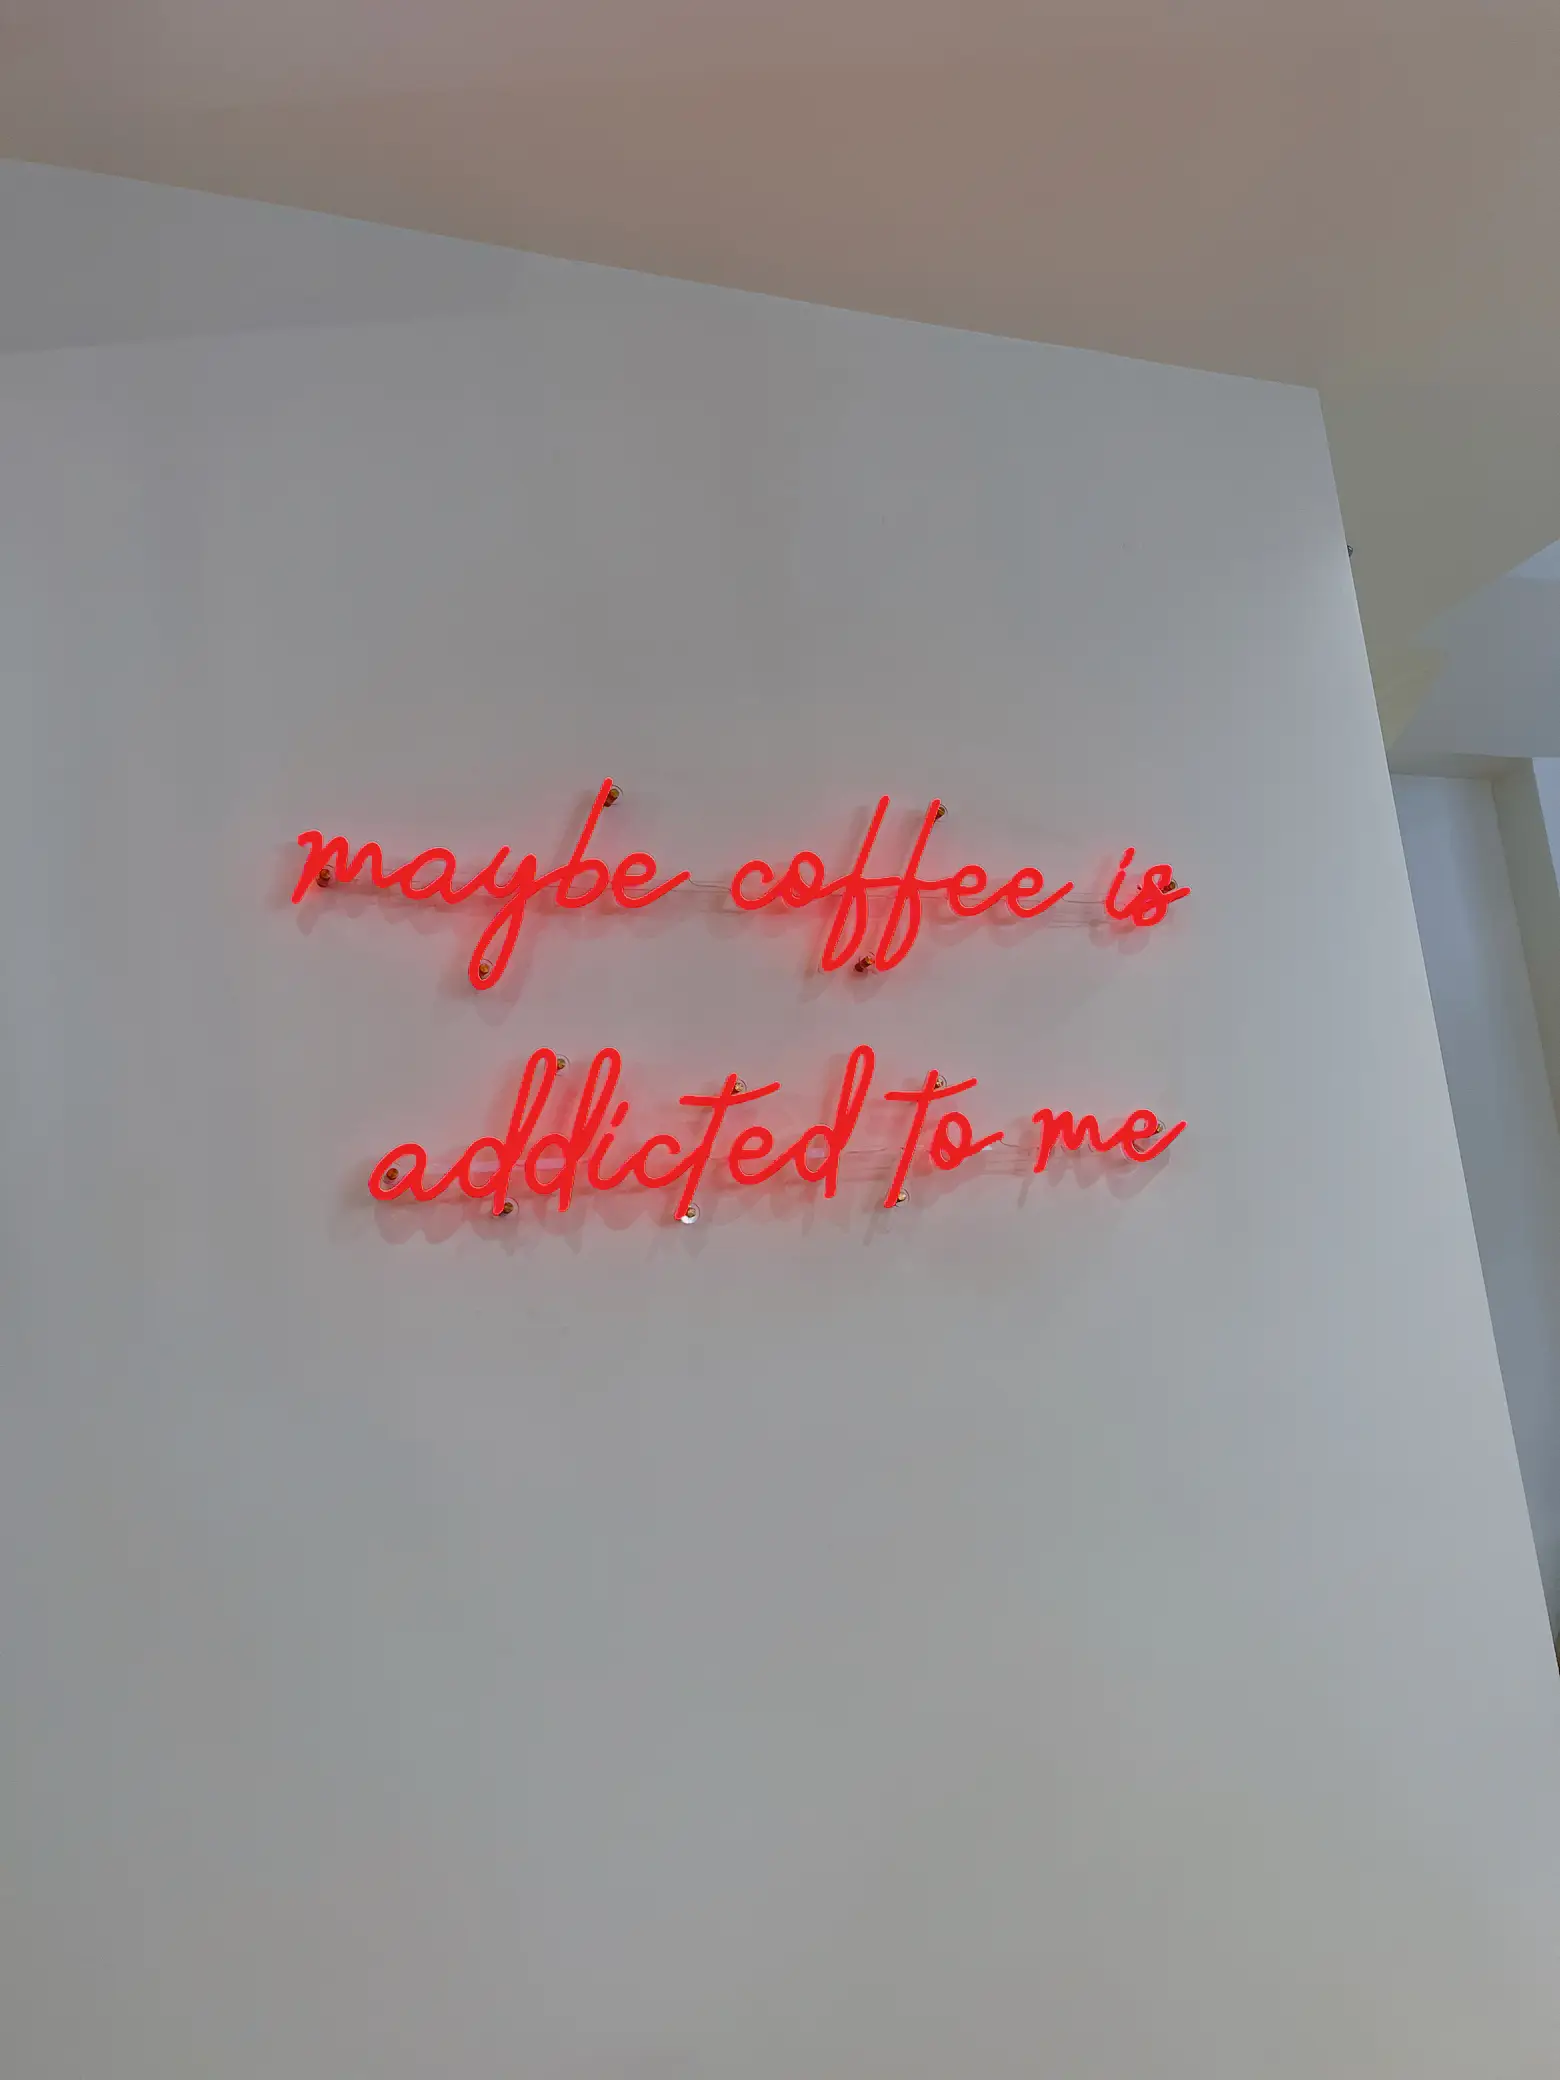  A neon sign that says "caffee is addicted to me".